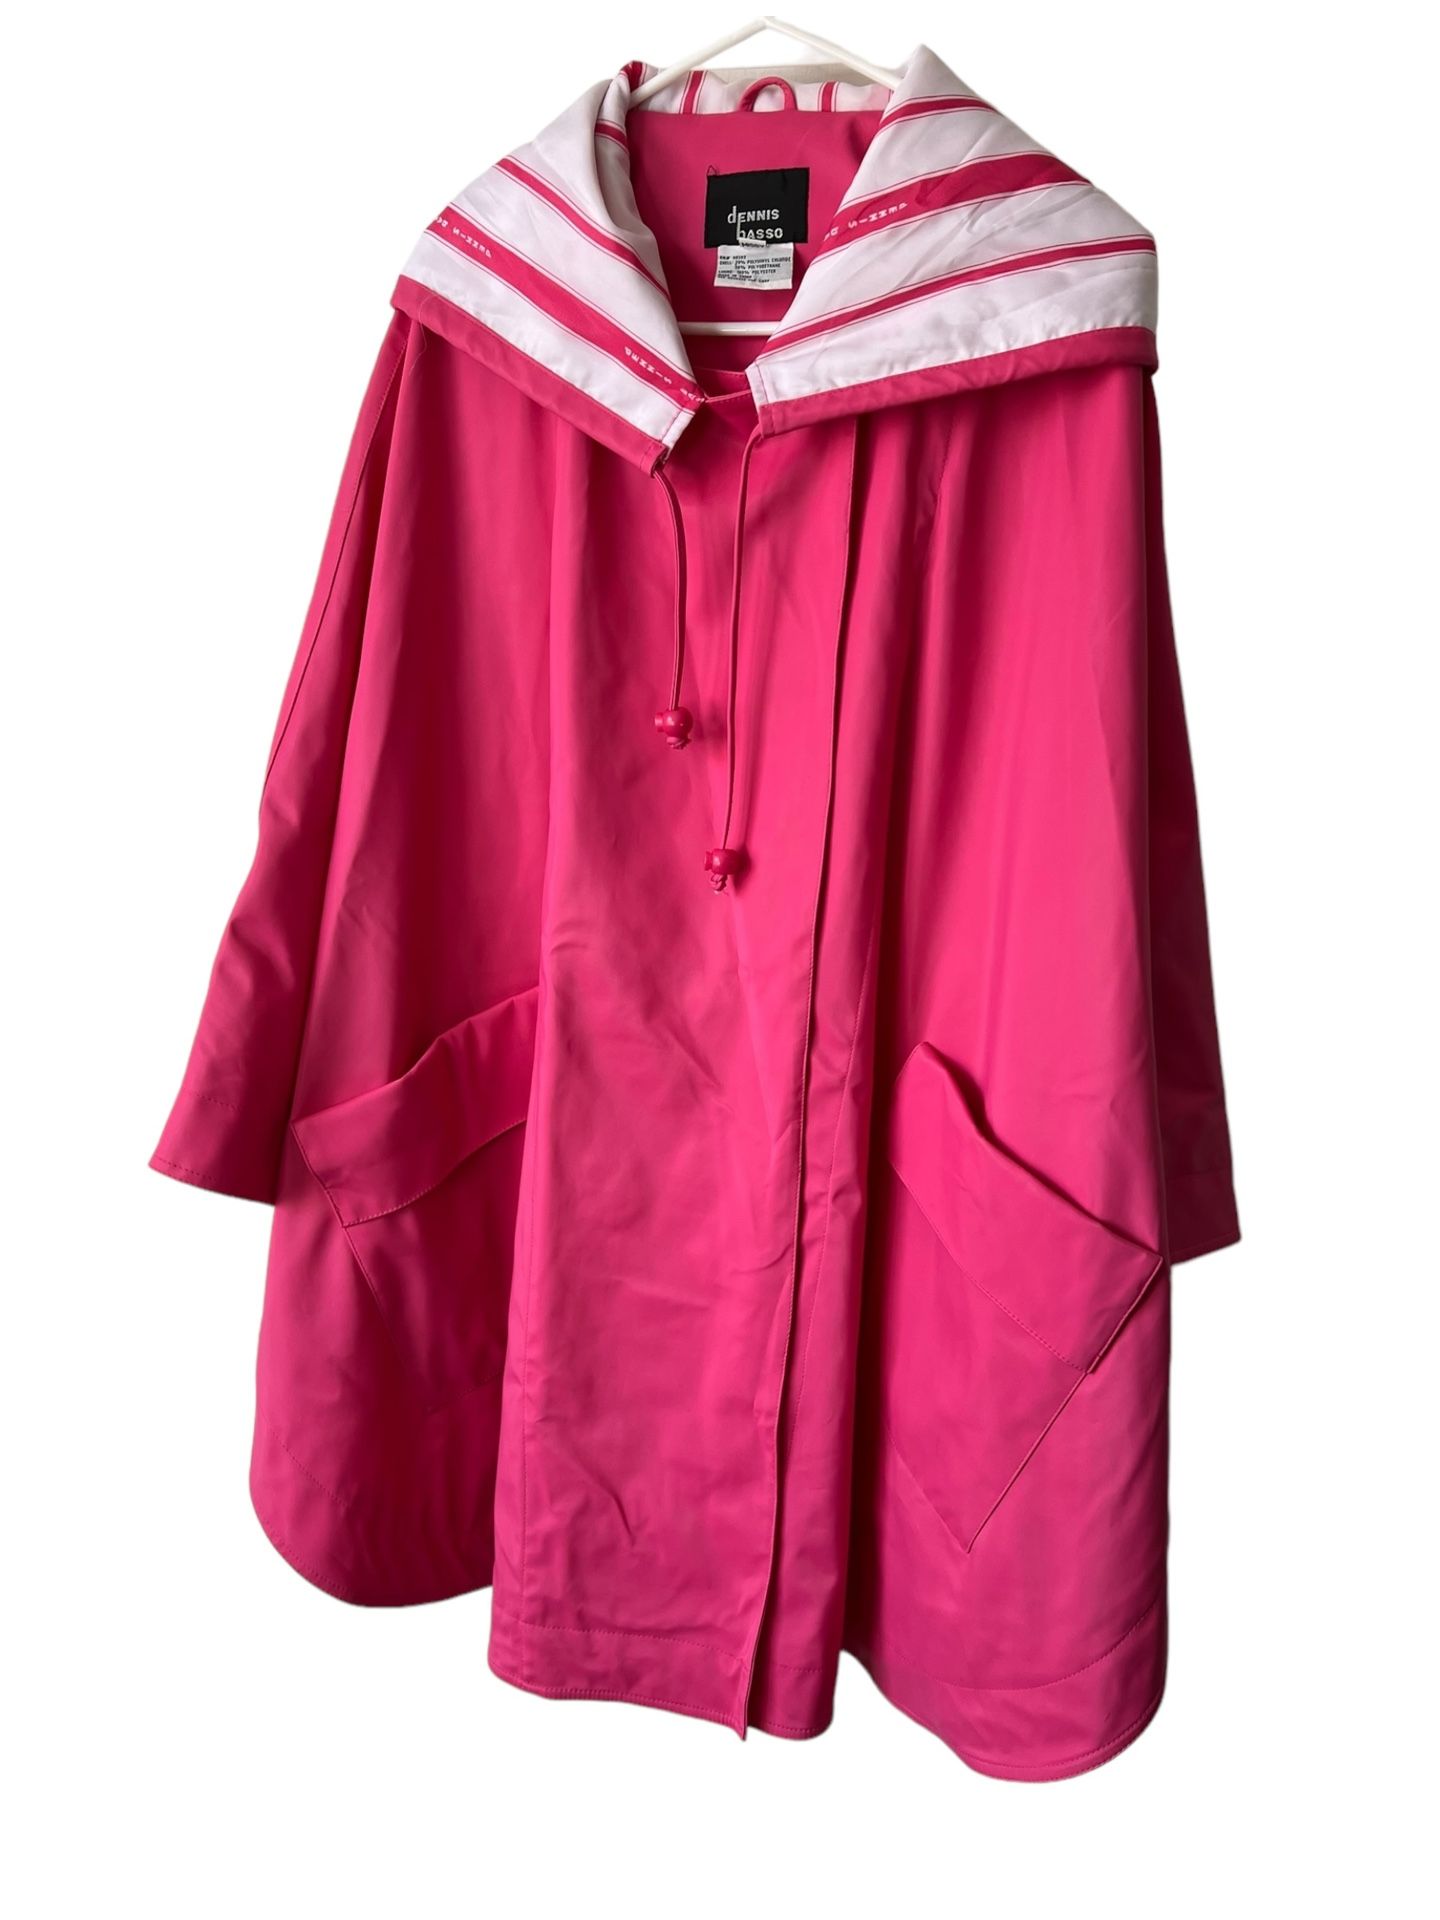 Dennis Basso Women Pink Raincoat Poncho Hooded Missy OS  Stay dry in style with this Dennis Basso pink raincoat poncho. Designed for women, this hoode